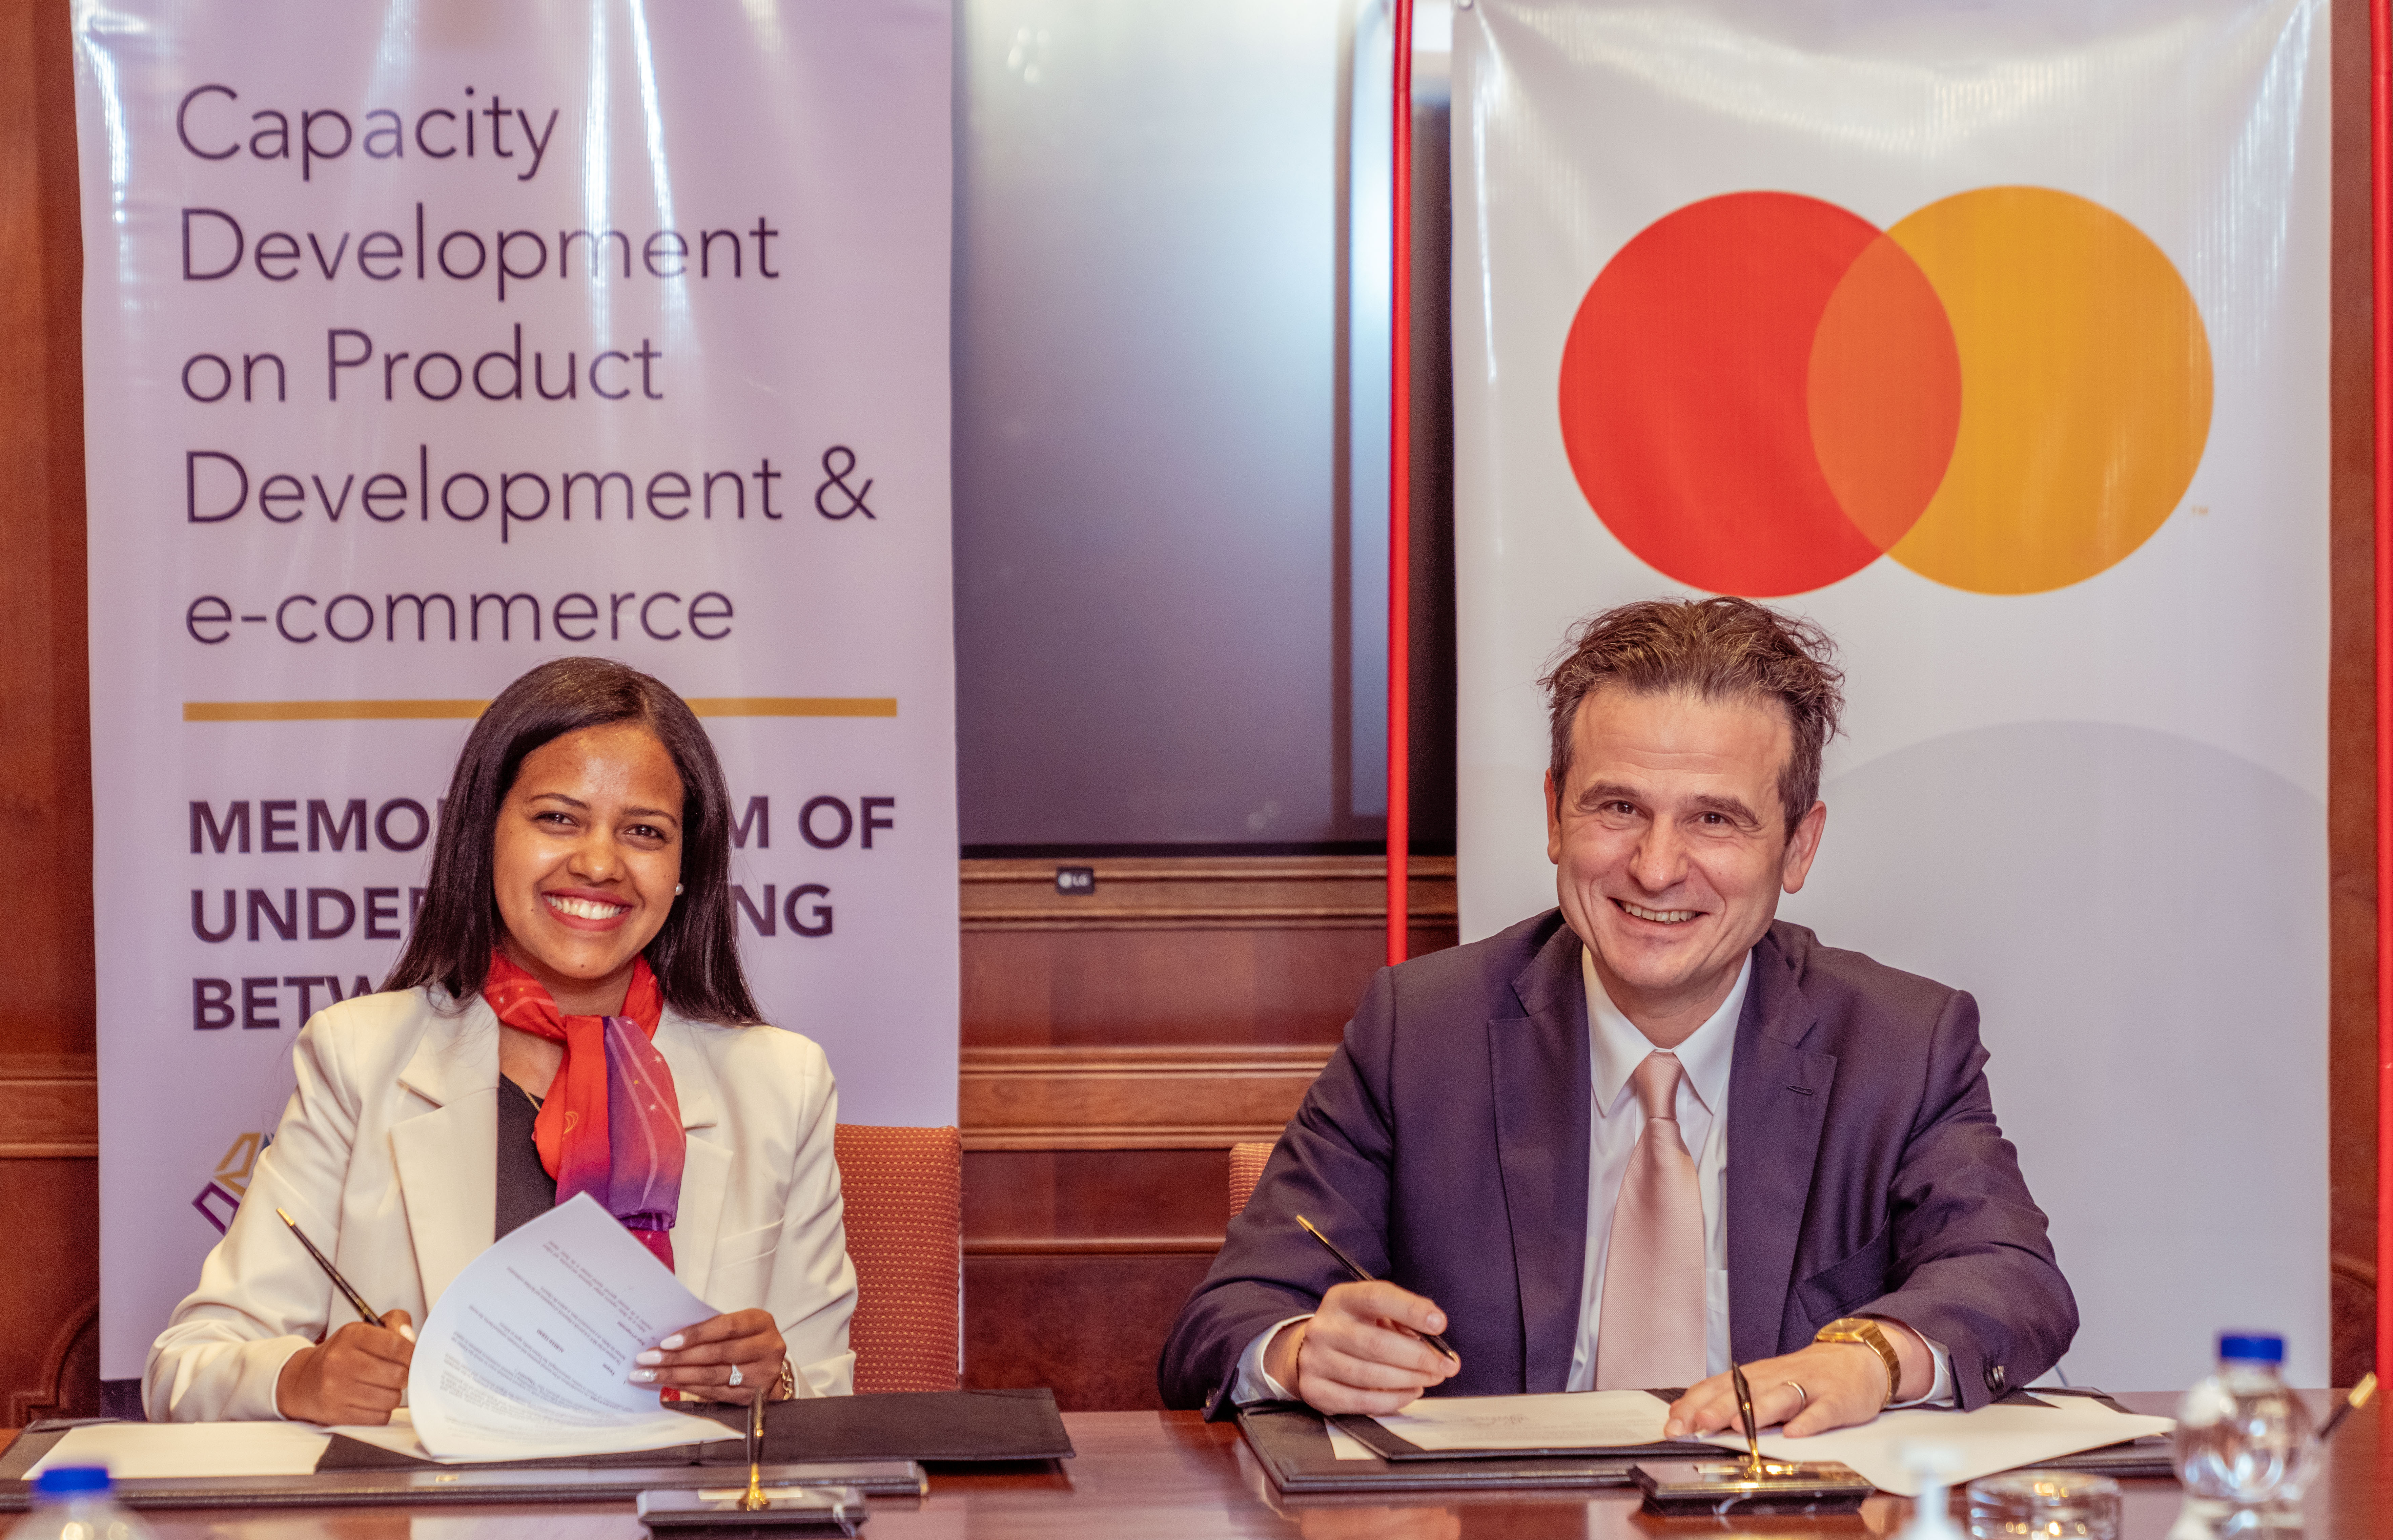 (L-R) Rahel Getachew, Chief Executive Officer, Ethiopian Minerals Petroleum and Biofuel Corporation (EMPBC) and Dimitrios Dosis, President of Eastern Europe, Middle East and Africa, Mastercard, signing the partnership agreement aimed at digitizing EMPBC’s mineral e-commerce platform through Mastercard’s Payment Gateway Service (MPGS).